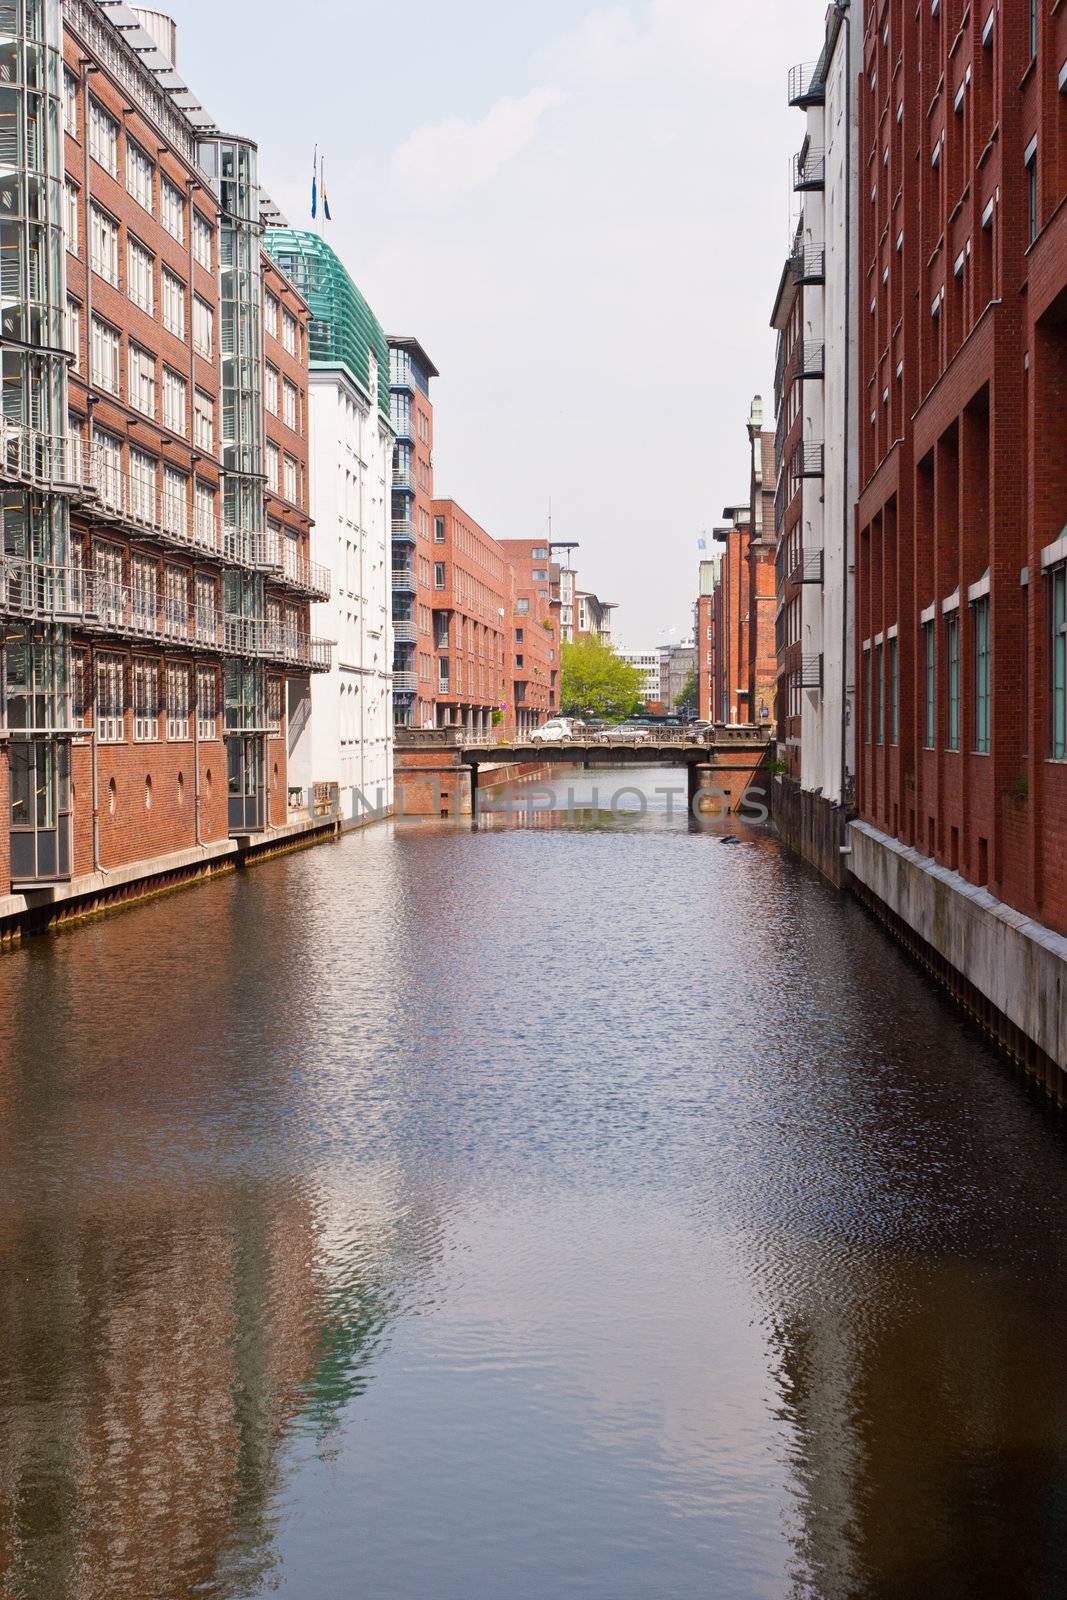 Speicherstadt in Hamburg, Germany is the world's largest timber-pile founded warehouse district of the world.